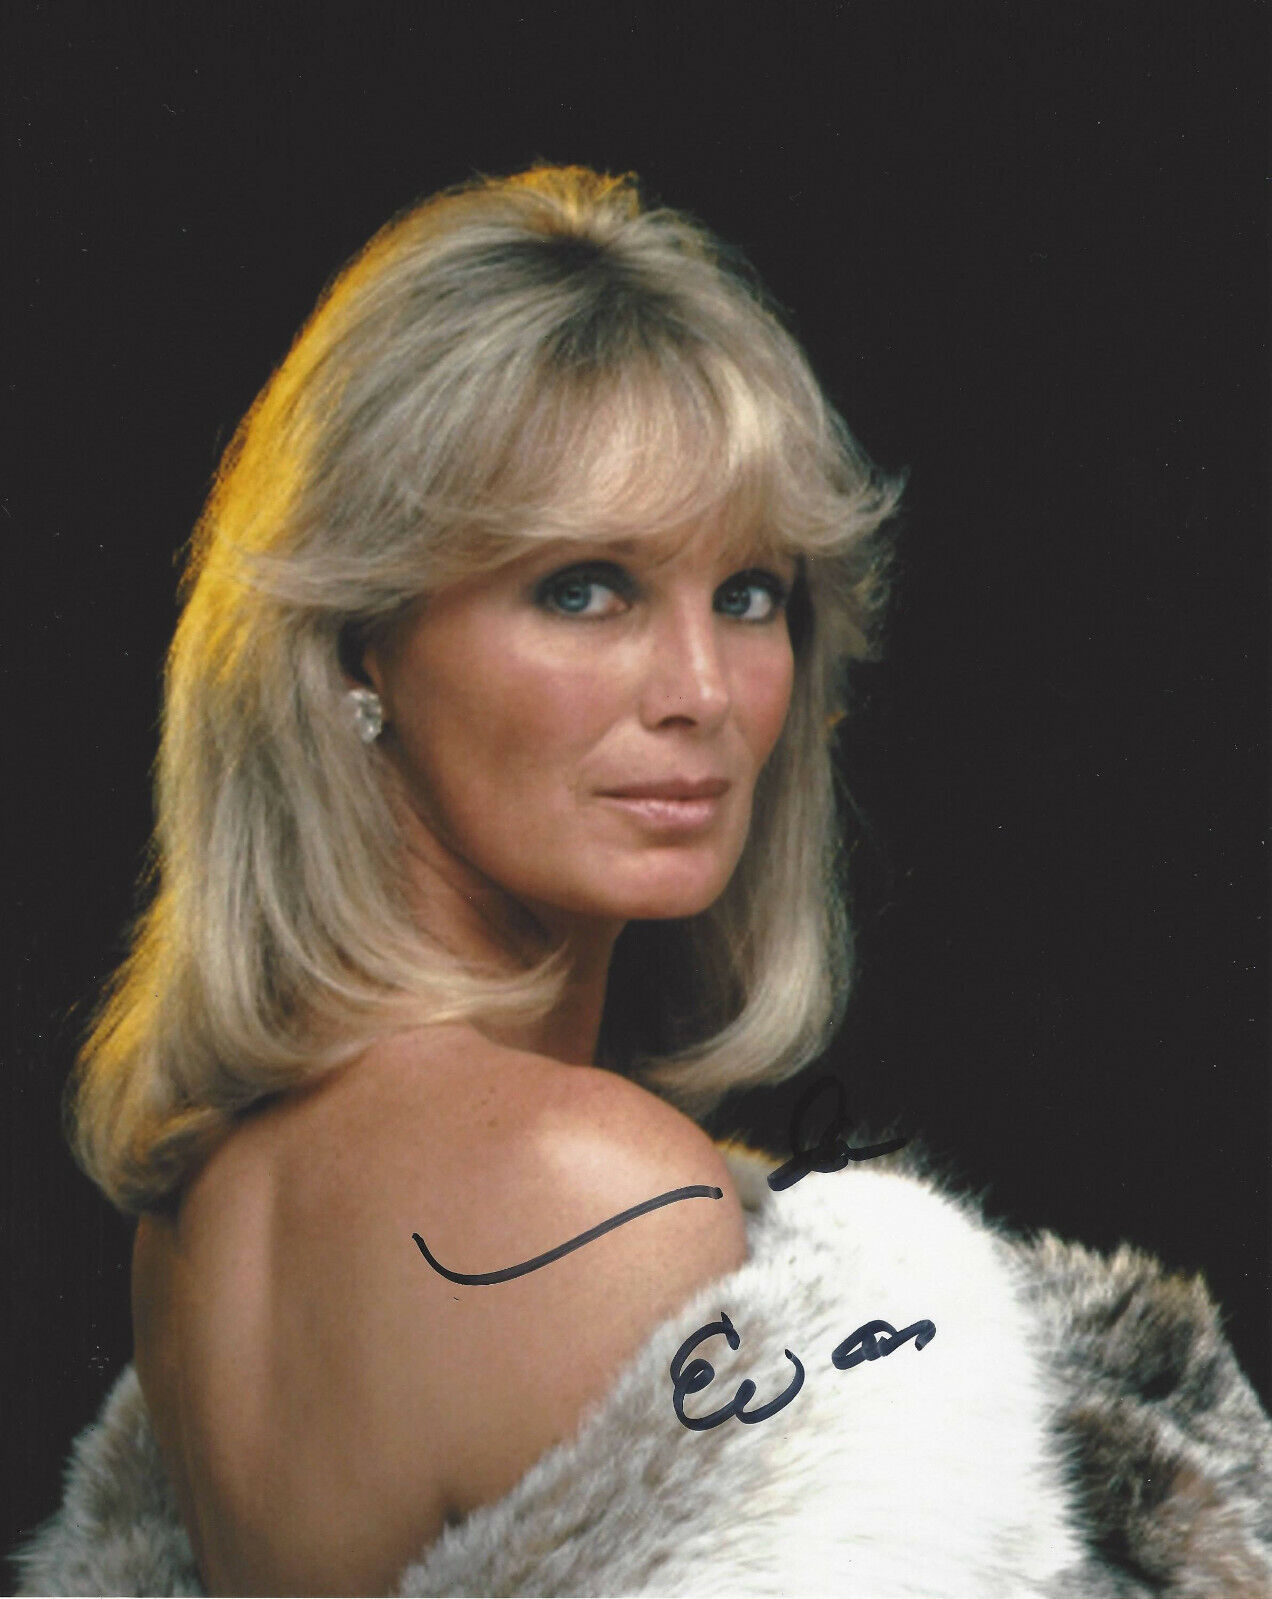 LINDA EVANS SIGNED AUTHENTIC 'DYNASTY' KRYSTLE 8x10 SHOW Photo Poster painting B w/COA ACTRESS